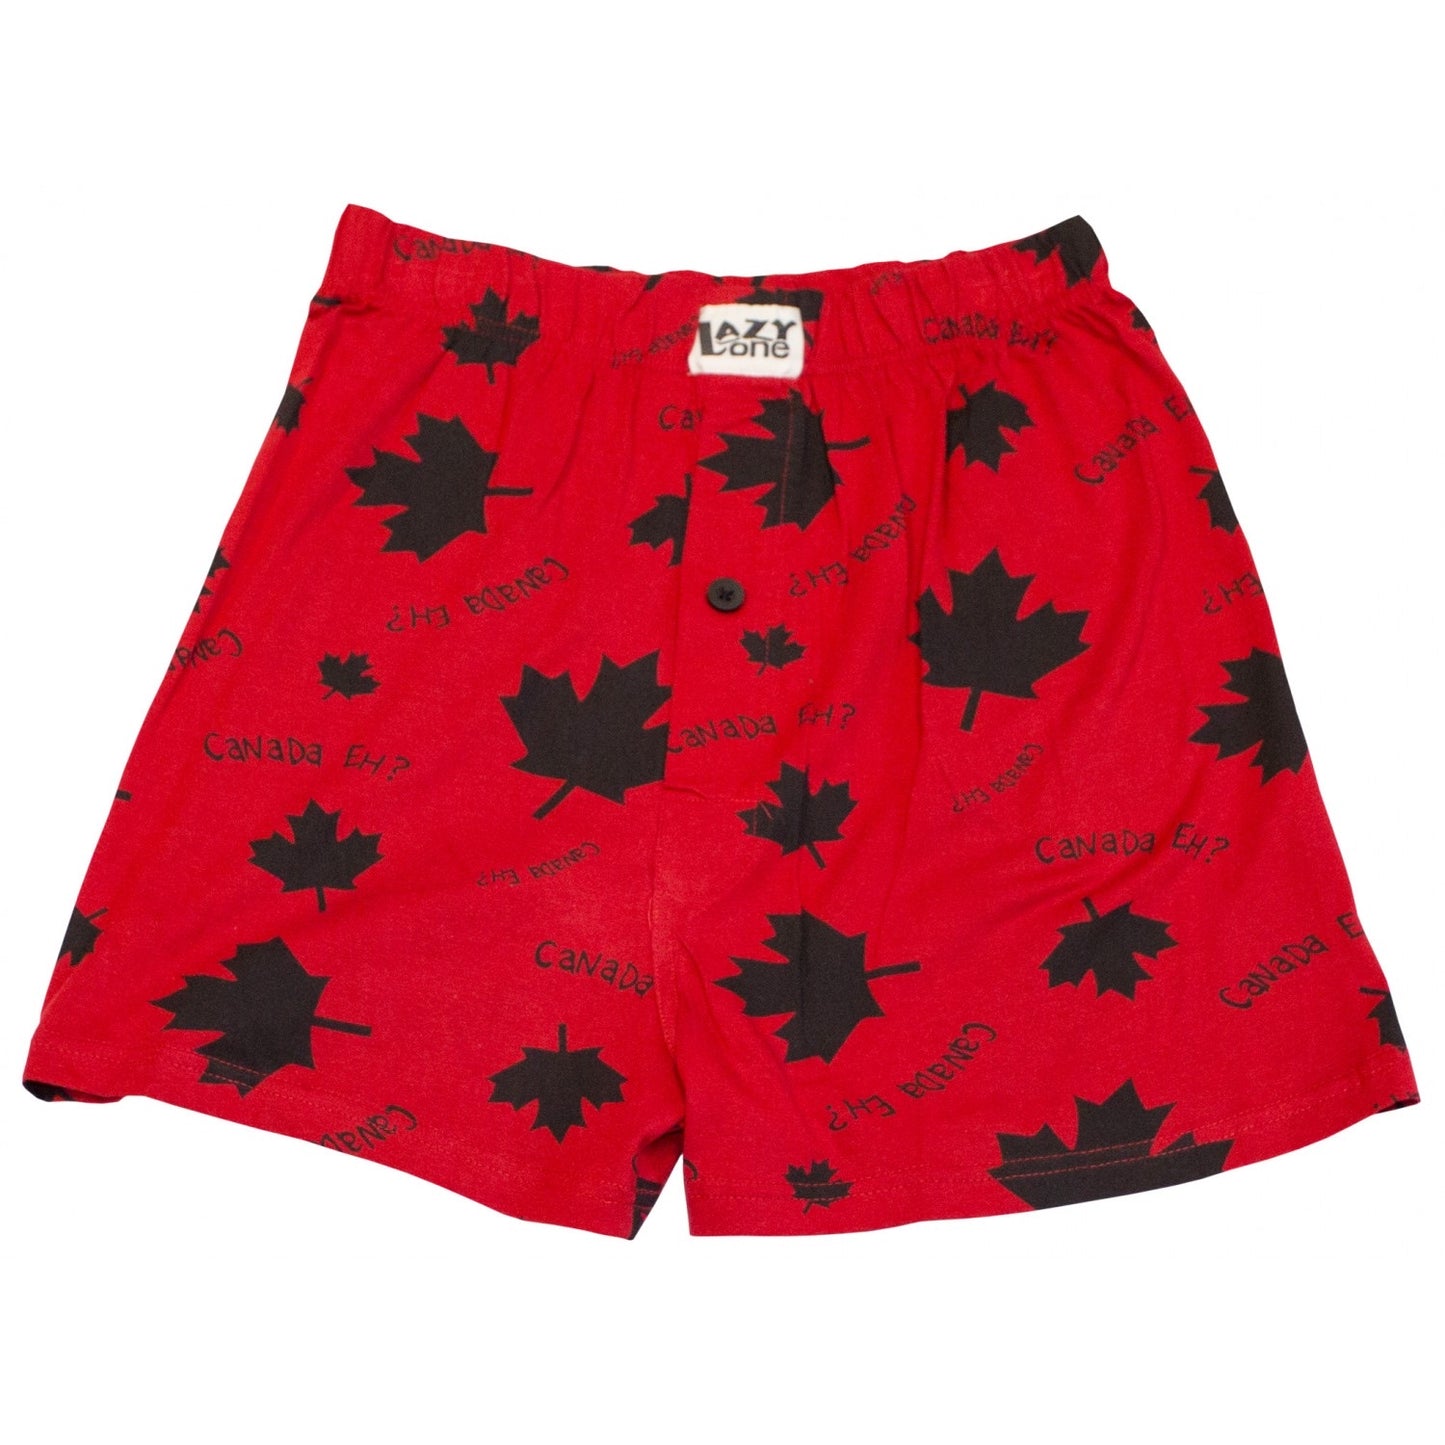 Lazy One unisex boxer shorts - red canada eh?